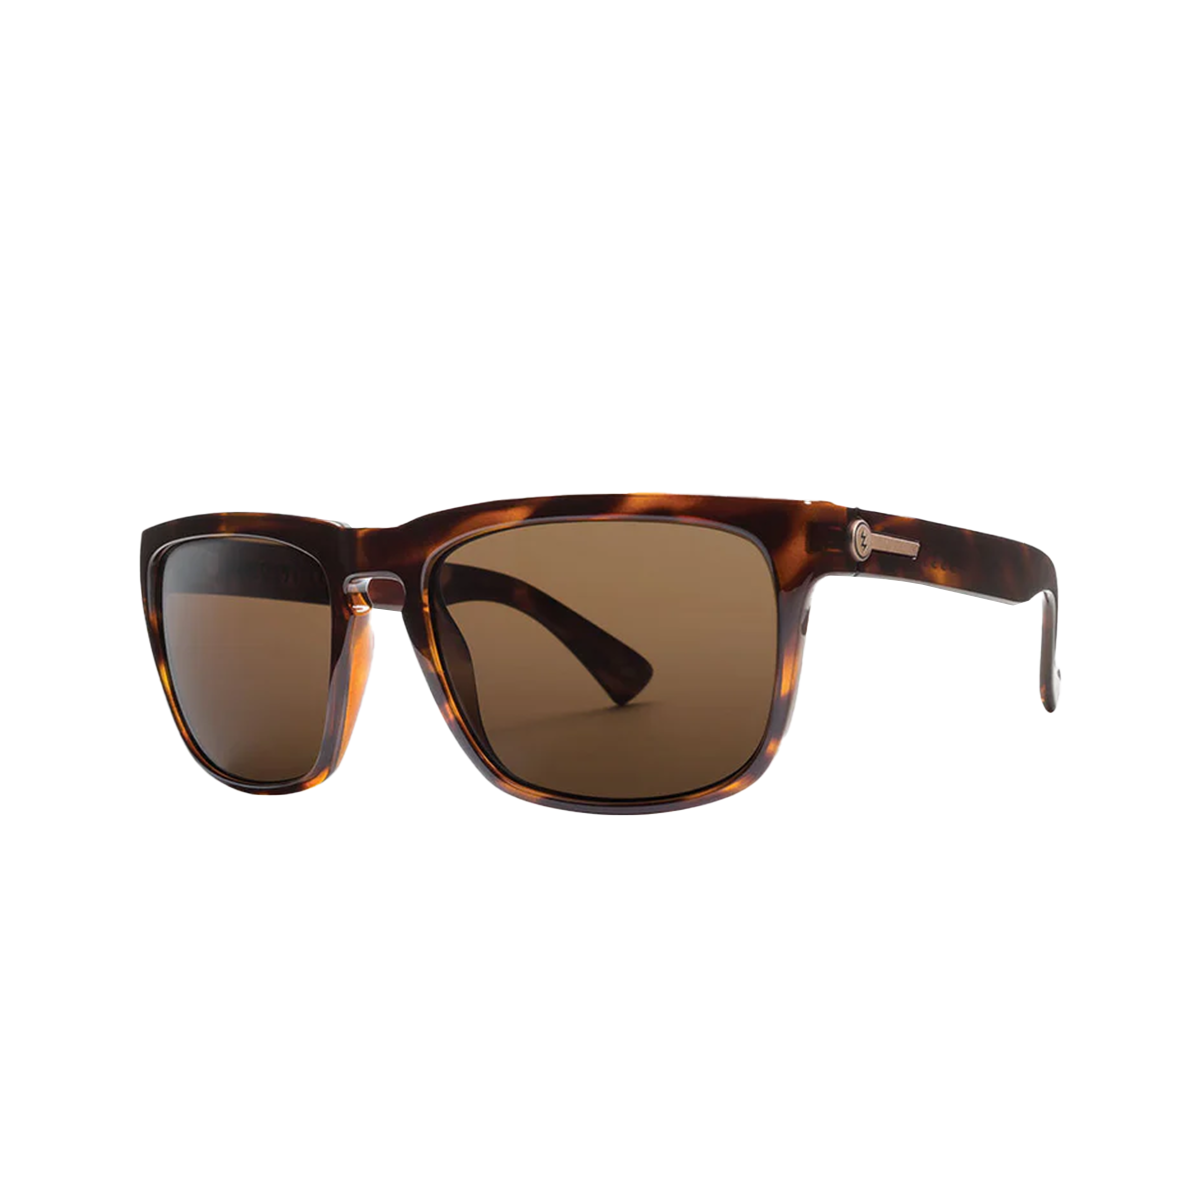 Electric Knoxville Sunglasses - Gloss Tort/ Bronze Polarized